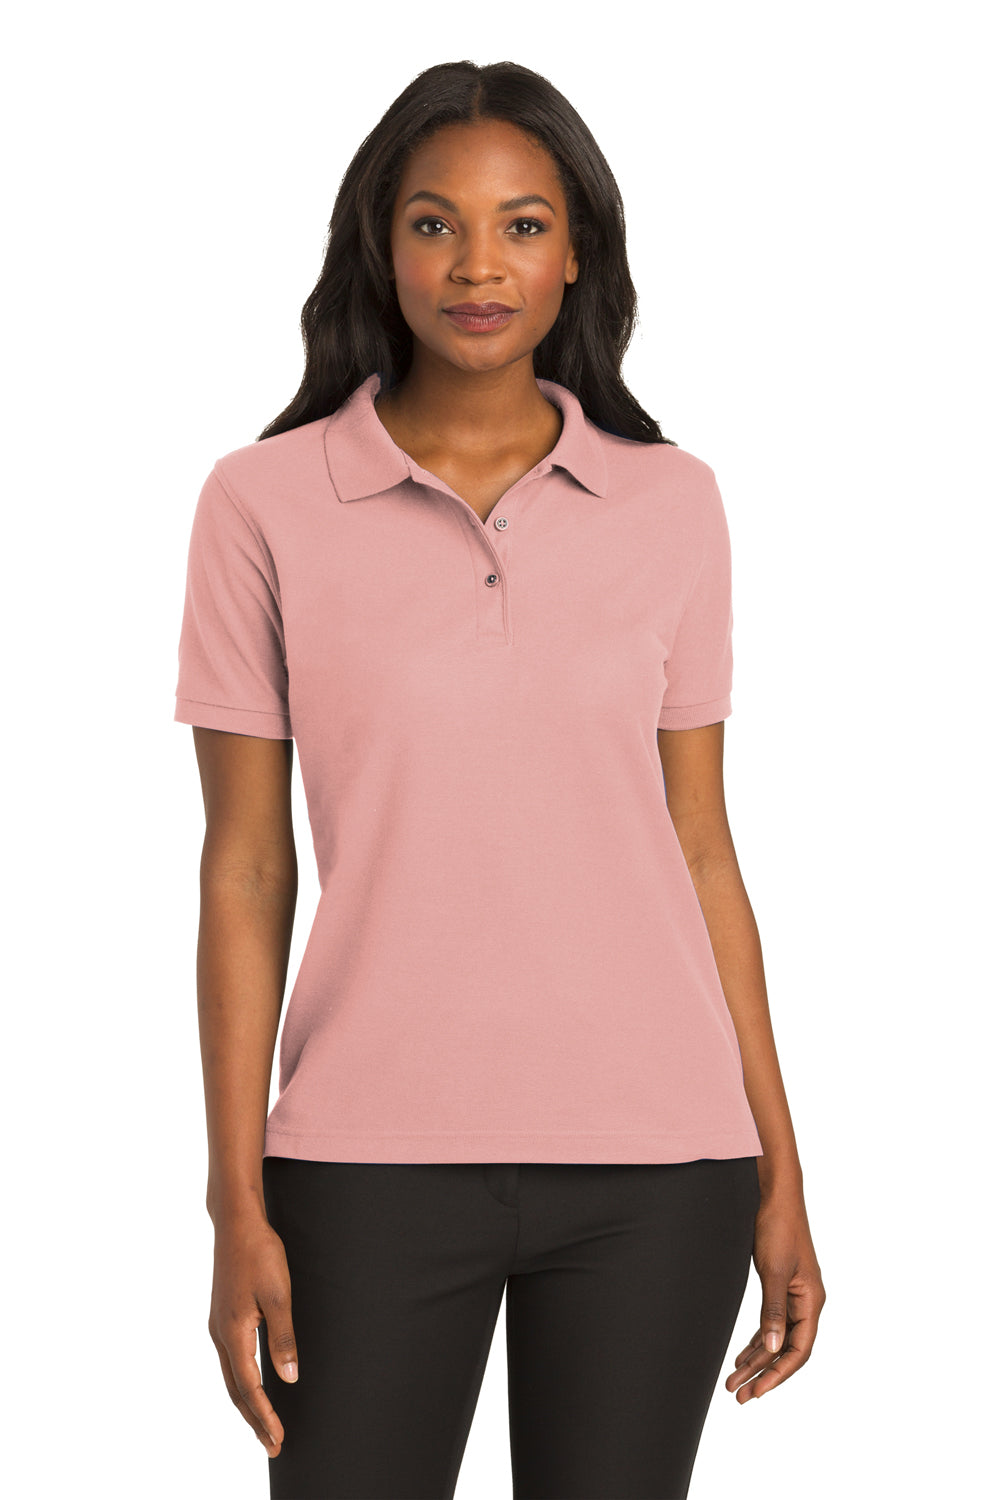 Port Authority L500 Womens Silk Touch Wrinkle Resistant Short Sleeve Polo Shirt Light Pink Front